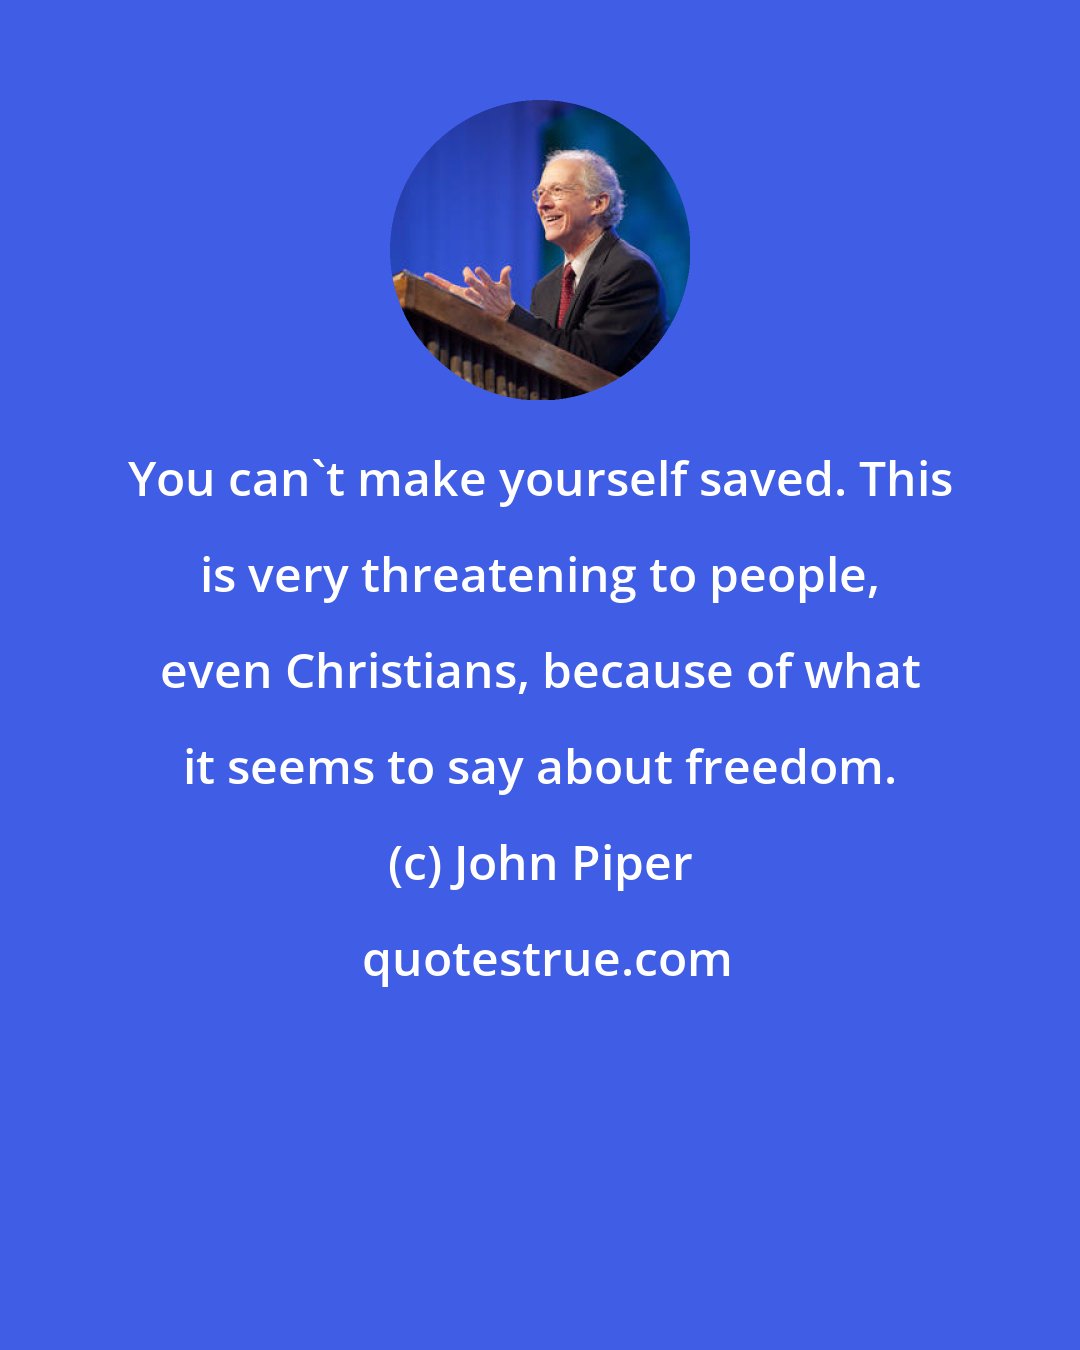 John Piper: You can't make yourself saved. This is very threatening to people, even Christians, because of what it seems to say about freedom.